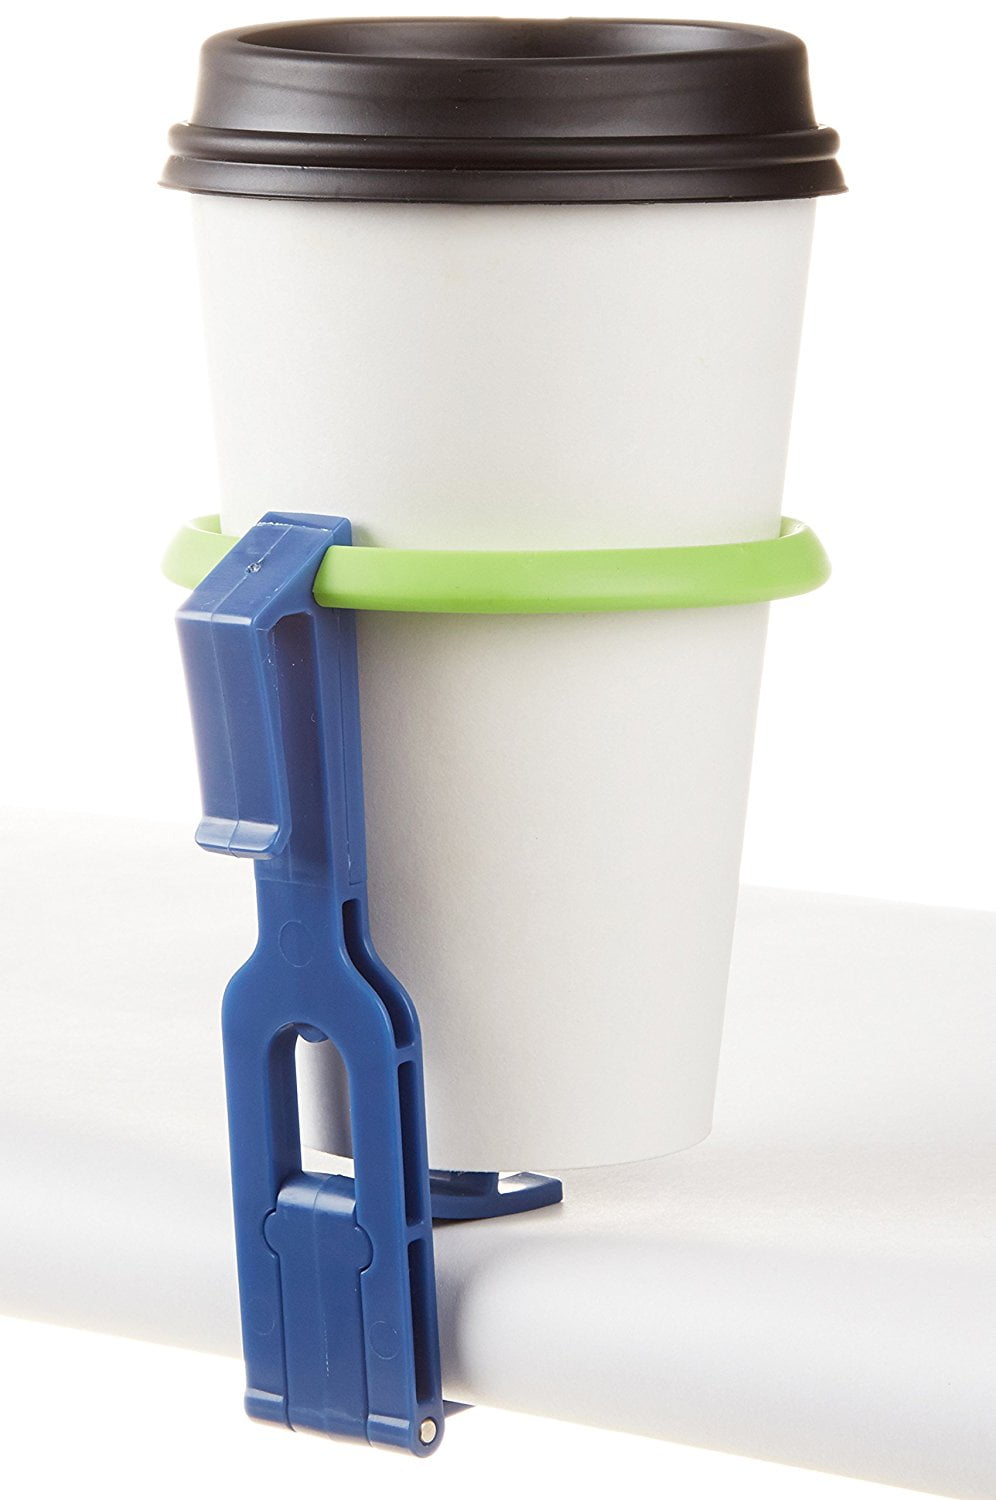 Airplane Cup Holder - Airplane Window Cup Holder - Airplane Travel